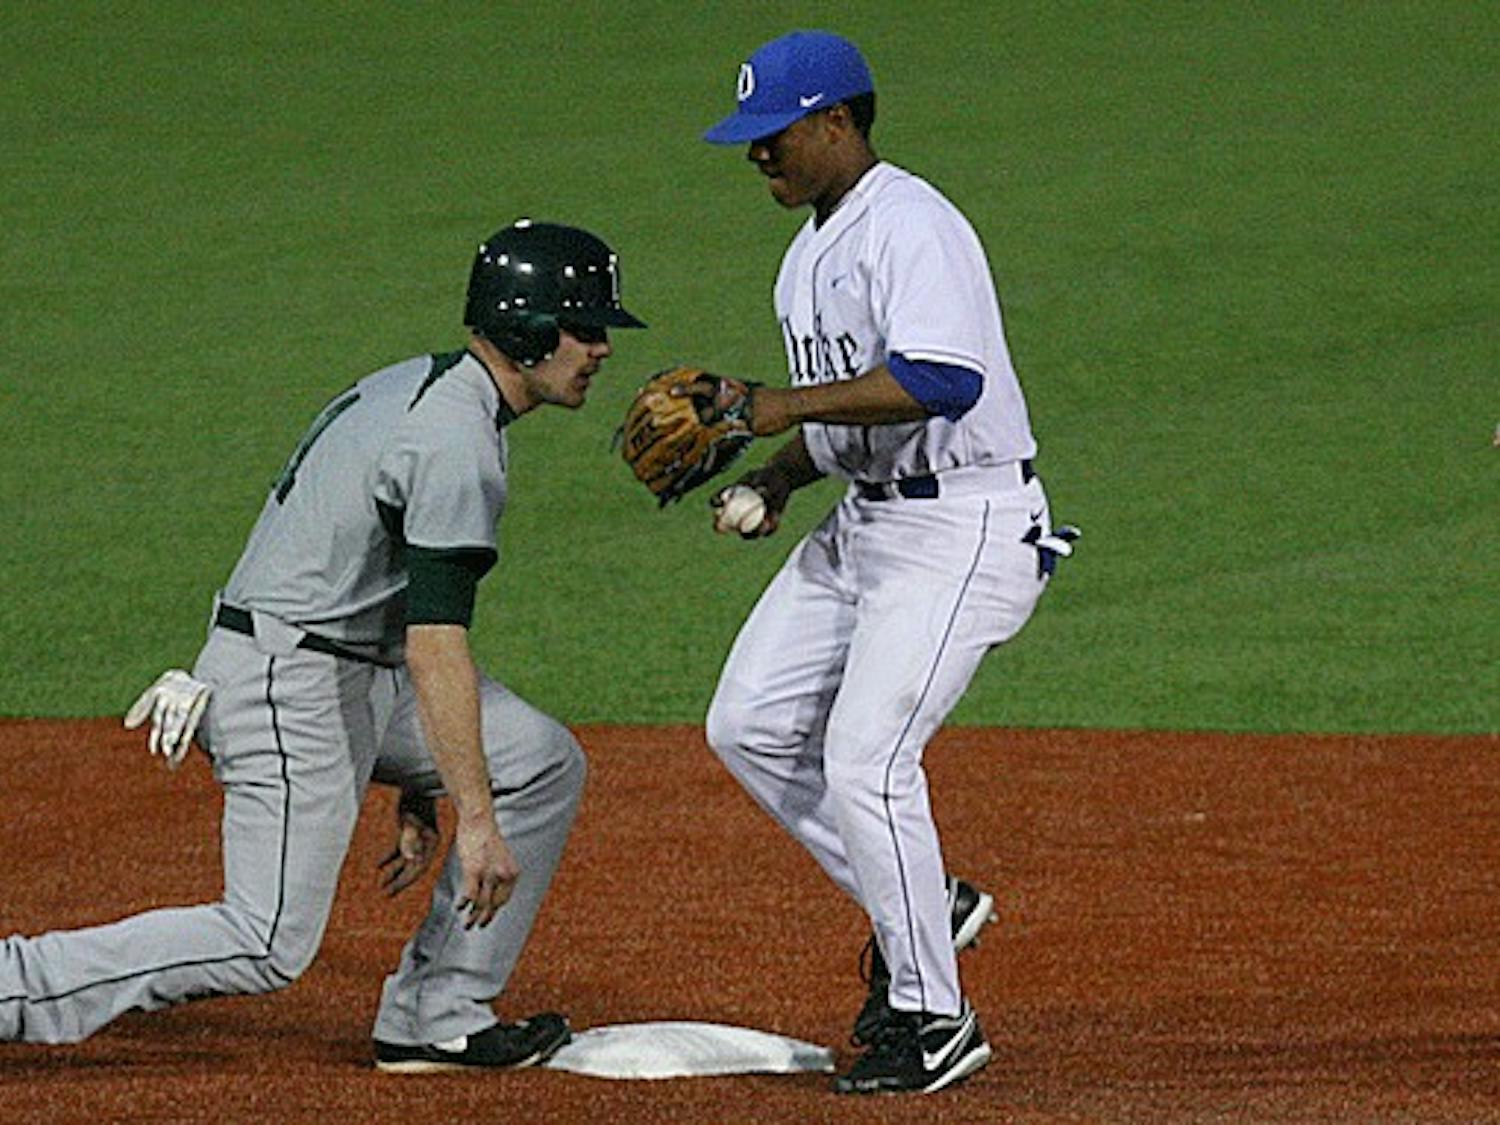 Ohio capitalized on several Duke mistakes in the top of the ninth inning to score three runs.